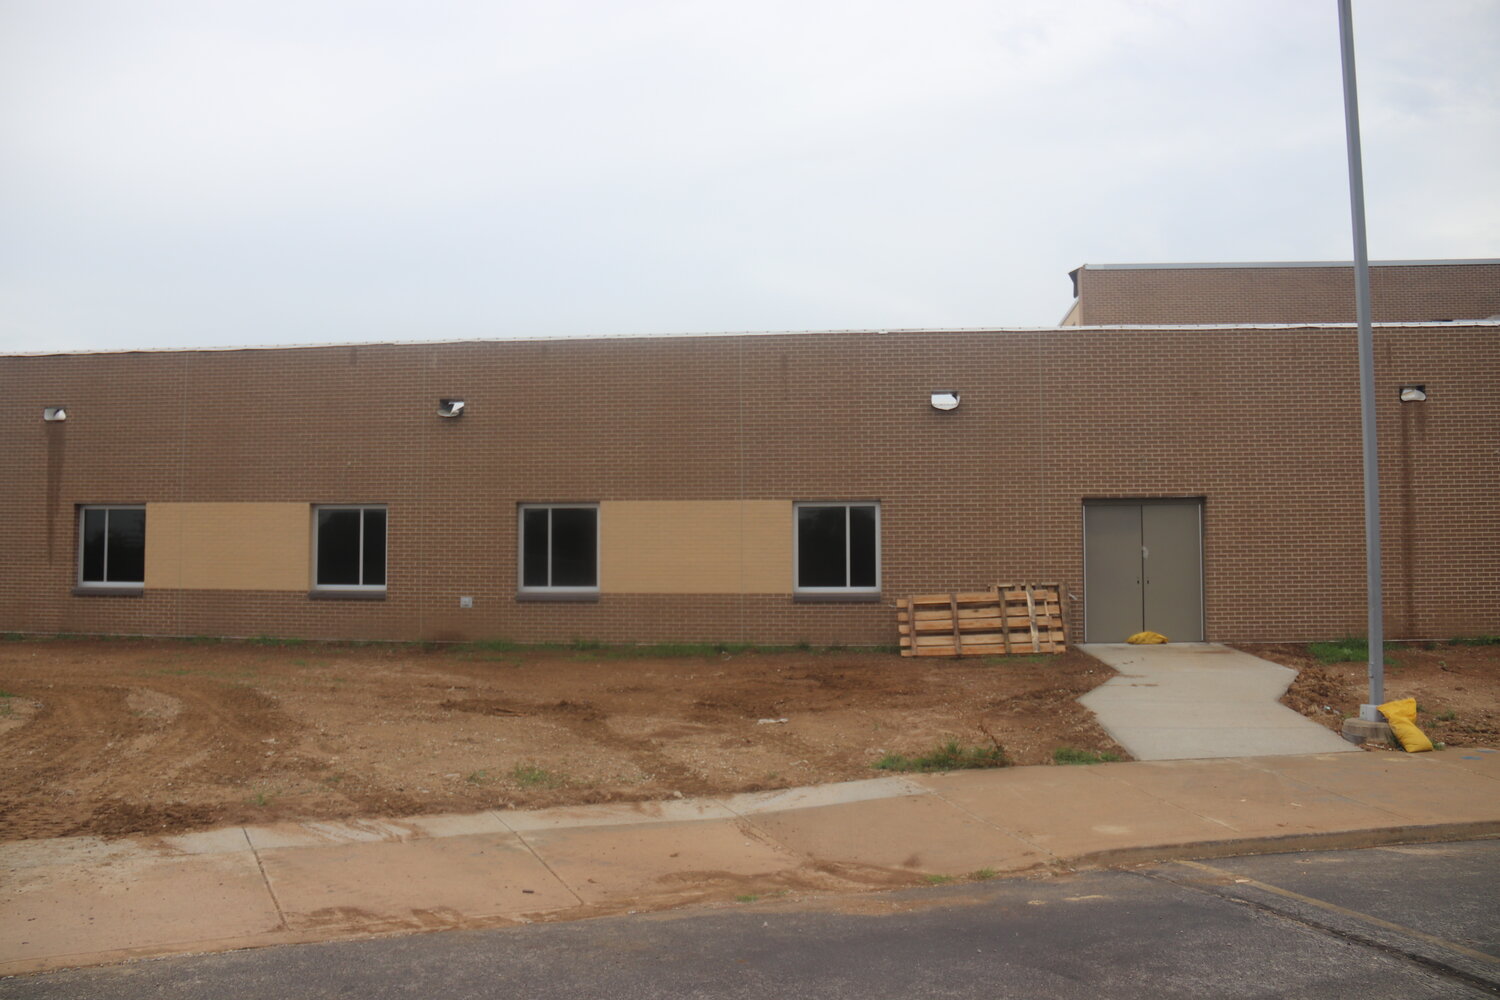 The new addition to East Elementary School was not completed in time for the new school year, but the district says it hasn't caused issues for students or teachers.